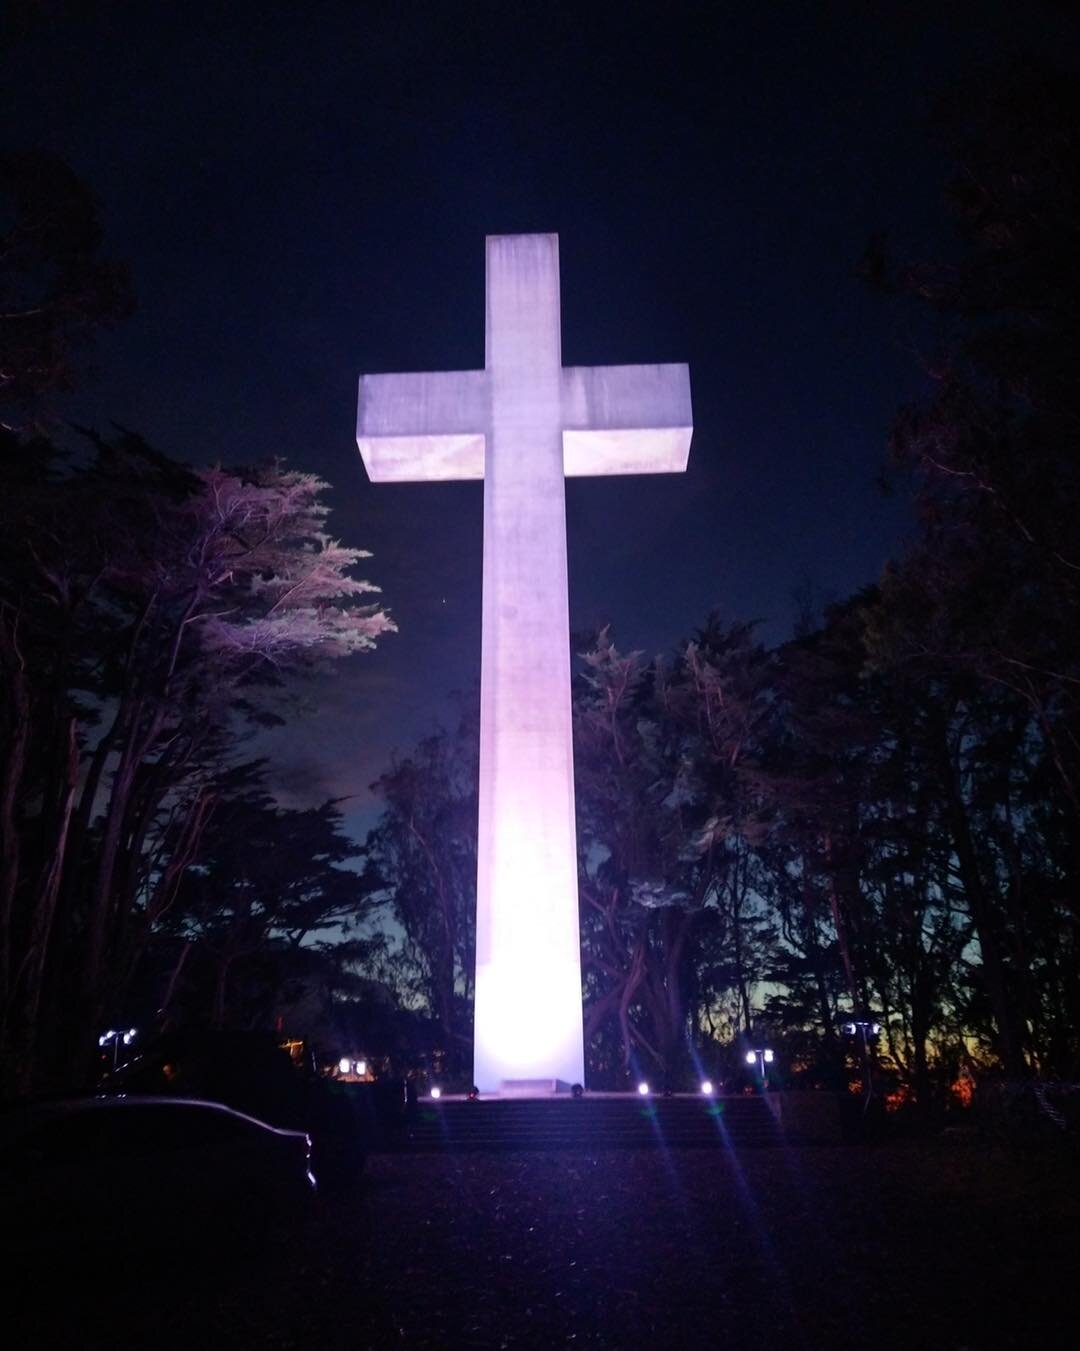 The historic cross gets illuminated twice a year, Easter Eve and to commemorate the Armenian Genocide. Ecumenical Easter sunrise service tomorrow morning starting at 7:00 a.m.